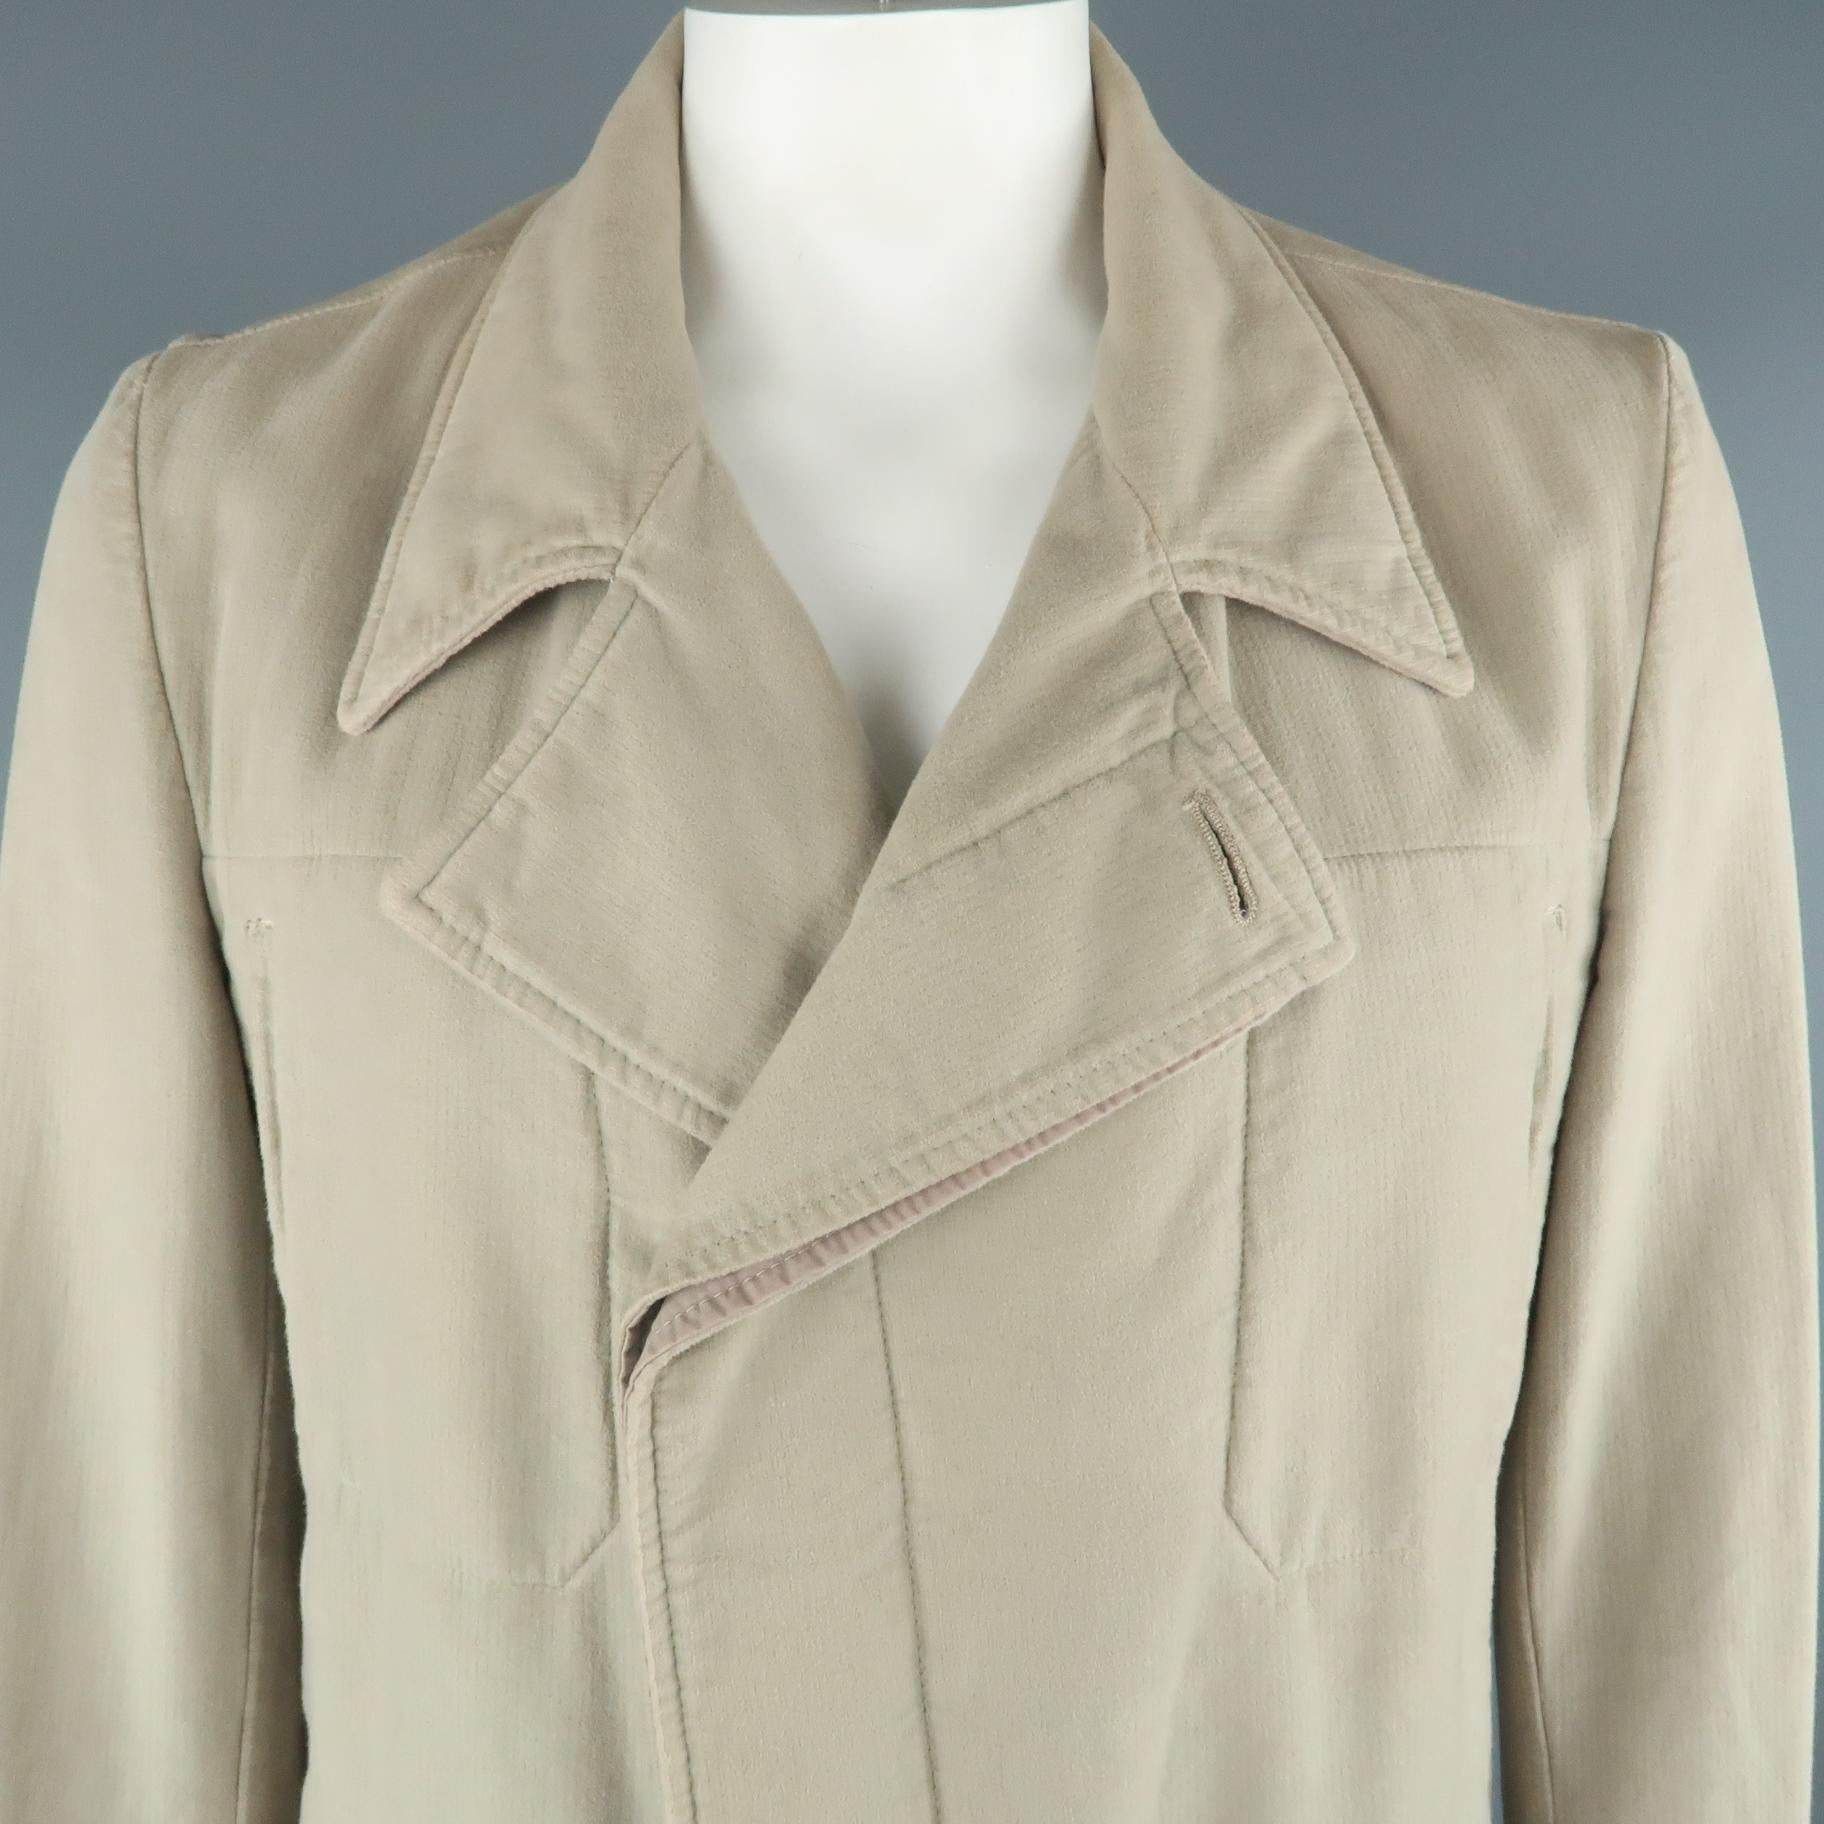 STEPHAN SCHNEIDER Peacoat comes in a khaki tone in a solid cotton material, with a notch lapel, slit pockets, hidden buttons at closure, double breasted. Made in Belgium.
 
Very Good Pre-Owned Condition.
Marked: 5

Measurements:
Shoulder: 17.5